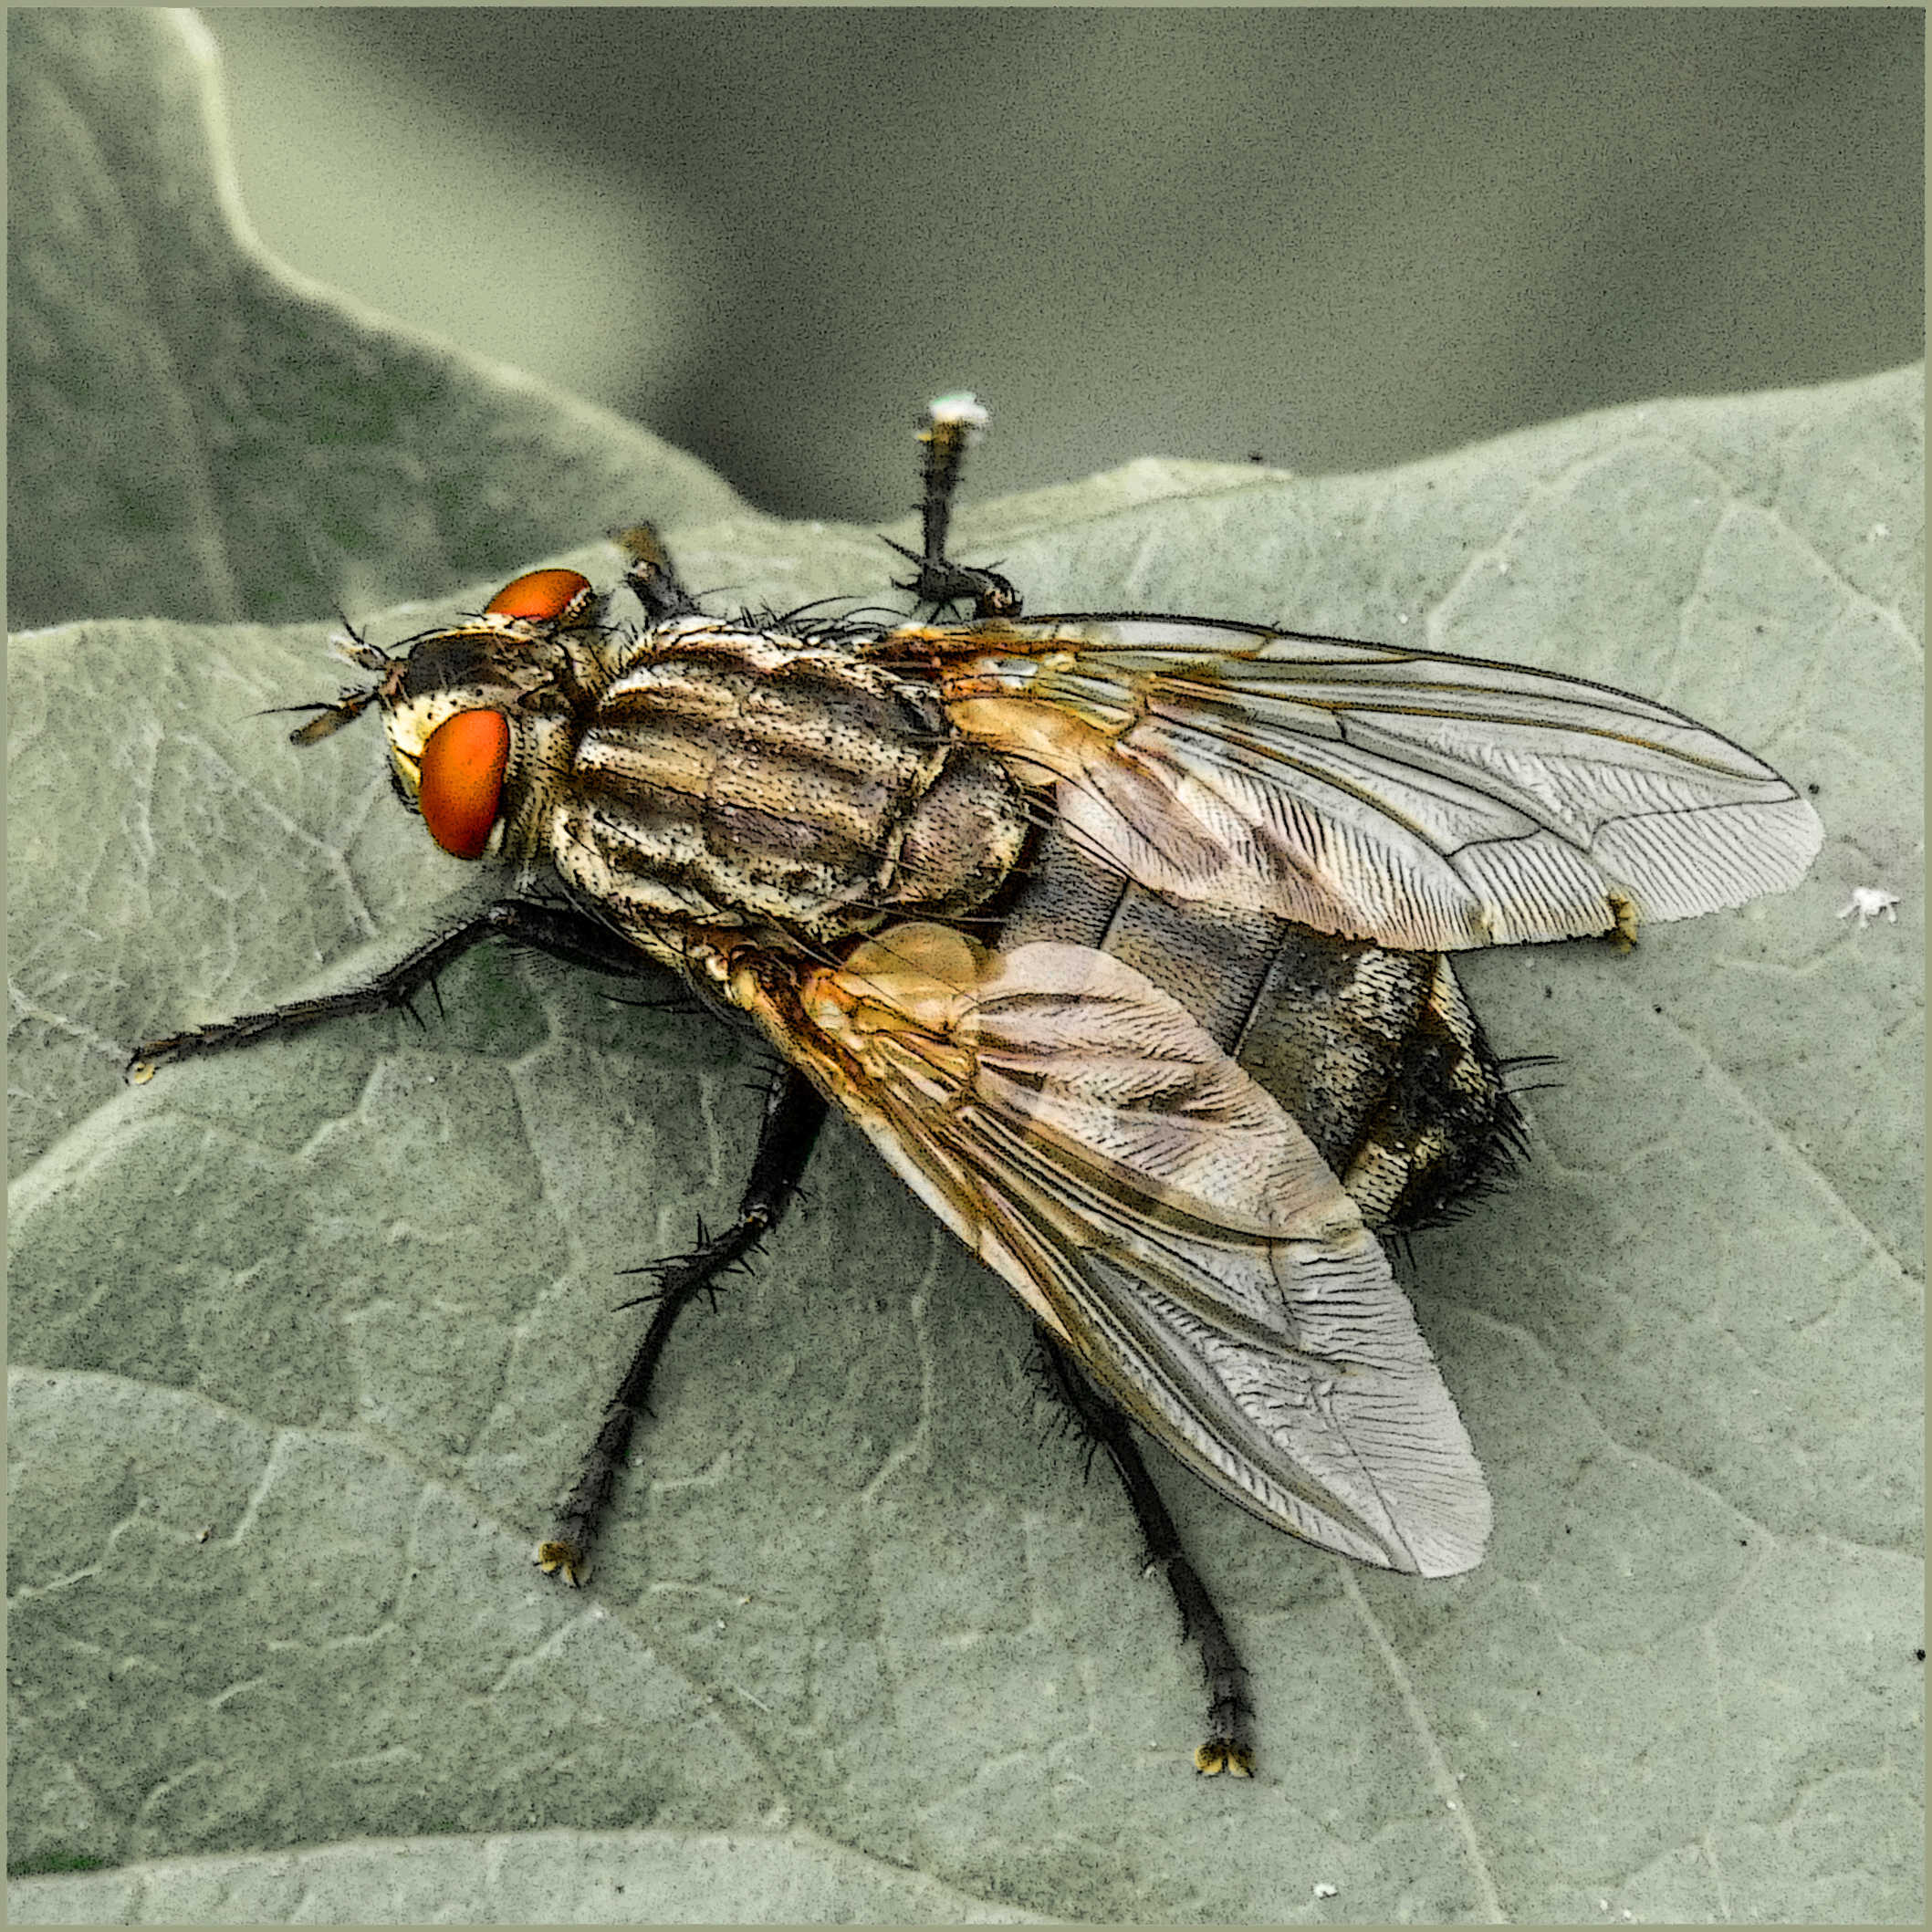 Flies are actually fab critters when you look at the detail.